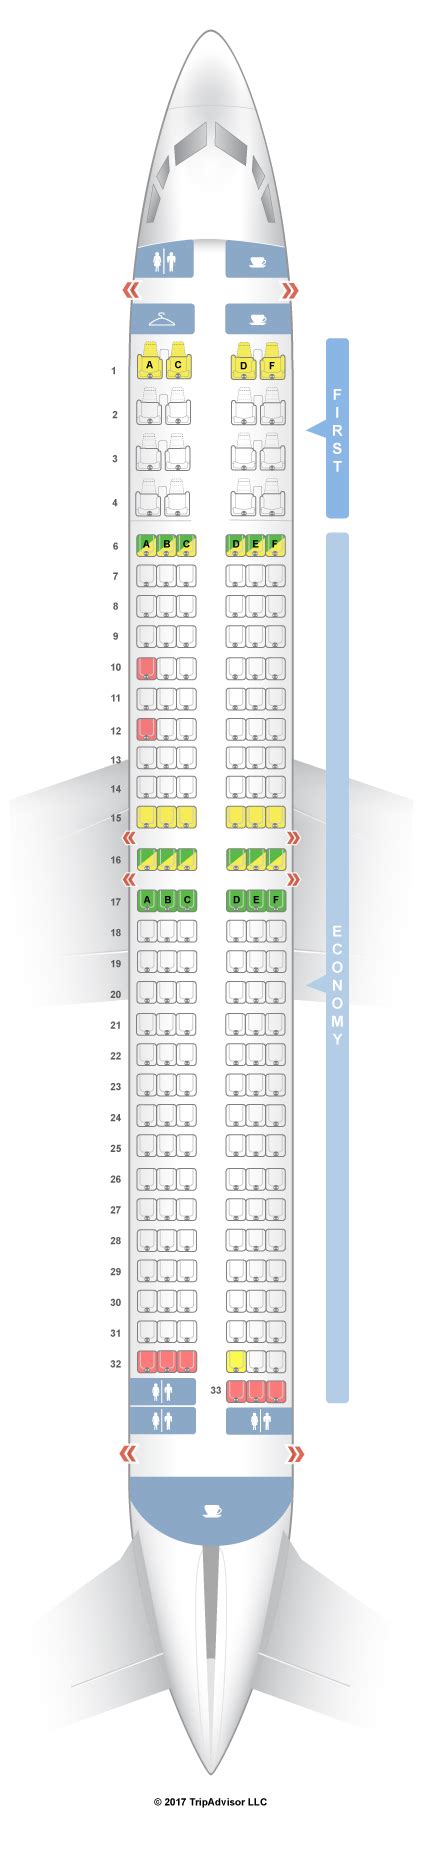 Contact information for renew-deutschland.de - local_pizza. Seat 10C is a standard economy aisle seat with 32" of seat pitch, which is average across Boeing 737-900's worldwide.